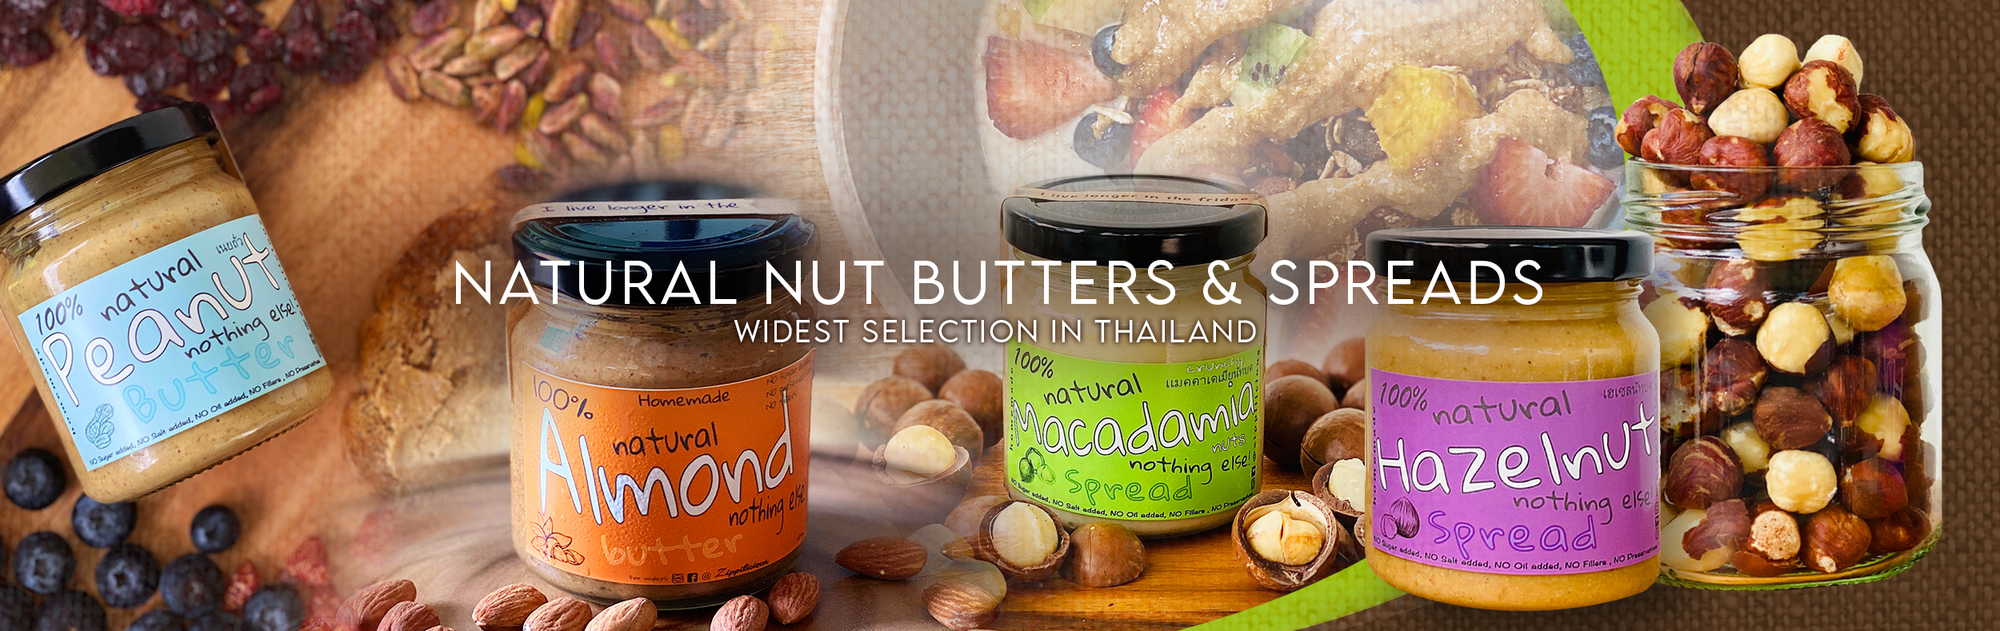 Natural Nut Butters and Spreads - Widest Selection in Thailand